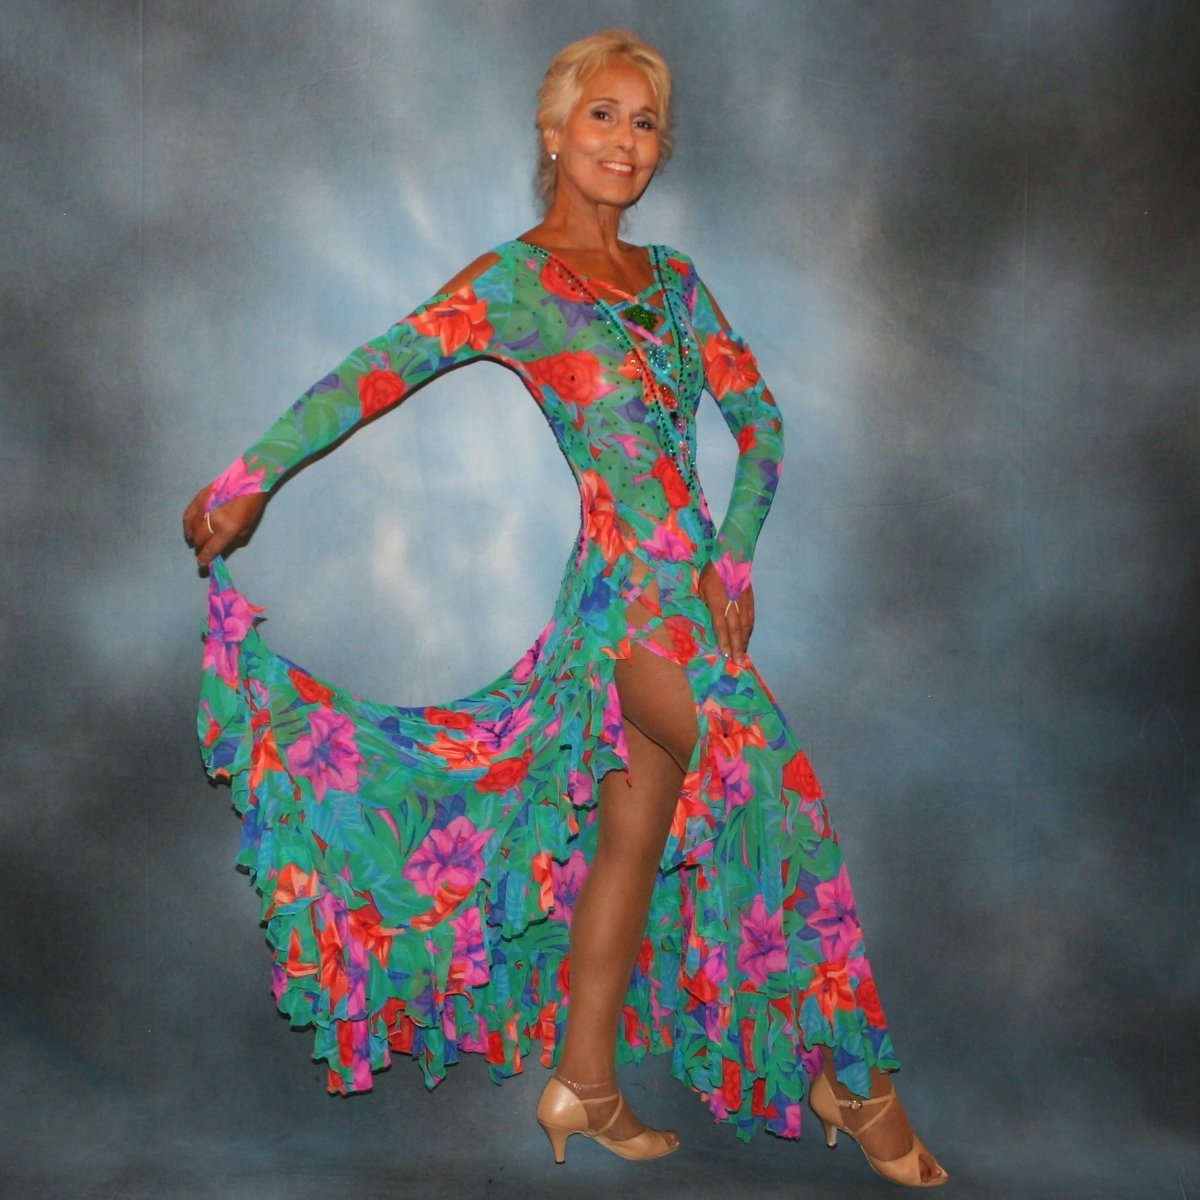 Crystal's Creations Gorgeous green tropical print Latin/rhythm dress with orange, pink & purple flowers in the print has lots of flounces up & around the high slit thighs, embellished with Swarovski rhinestone work, along with lattice strap detailing & hand beading.